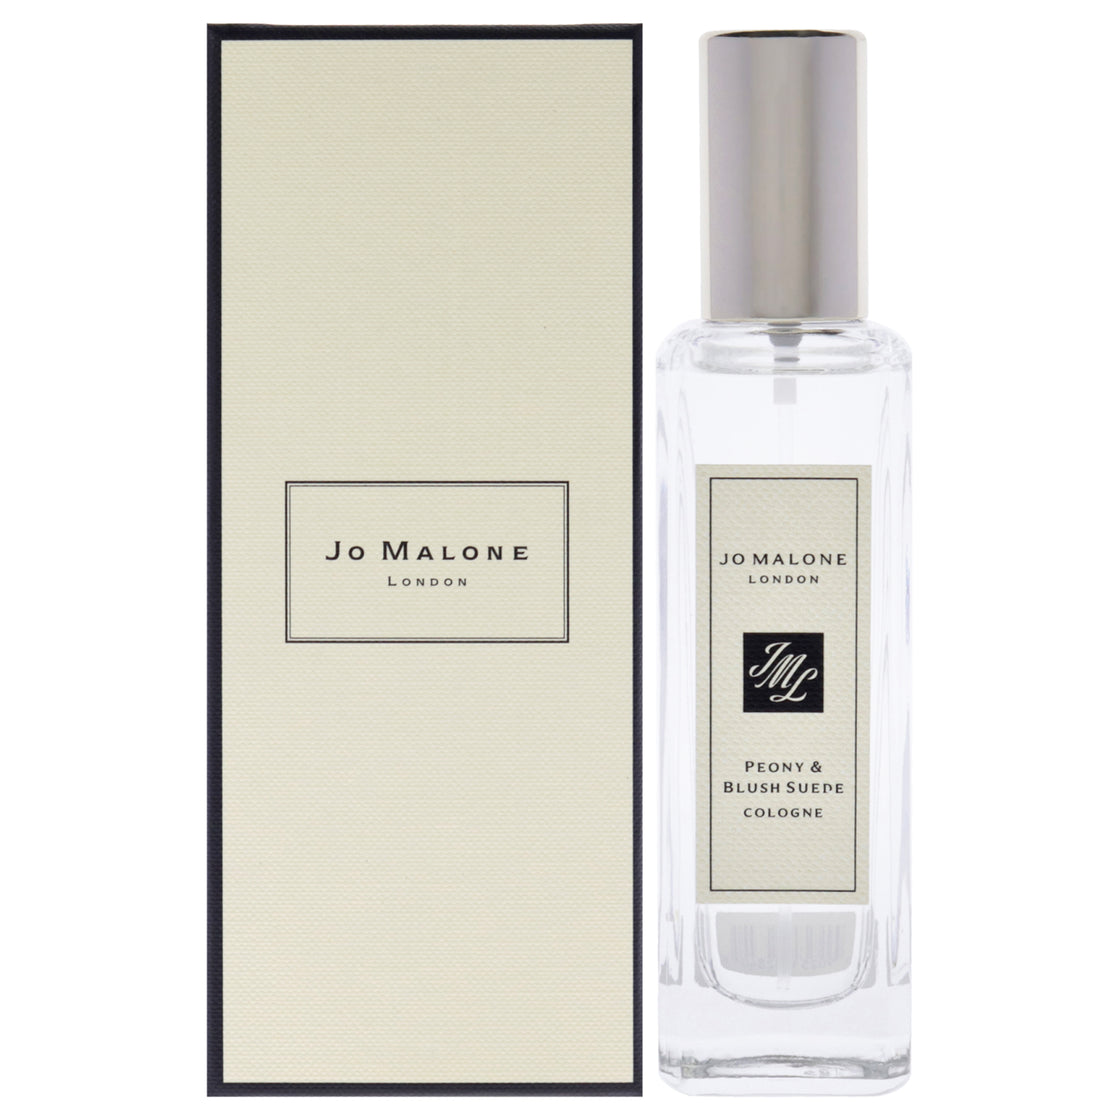 Peony and Blush Suede by Jo Malone for Women - 1 oz Cologne Spray